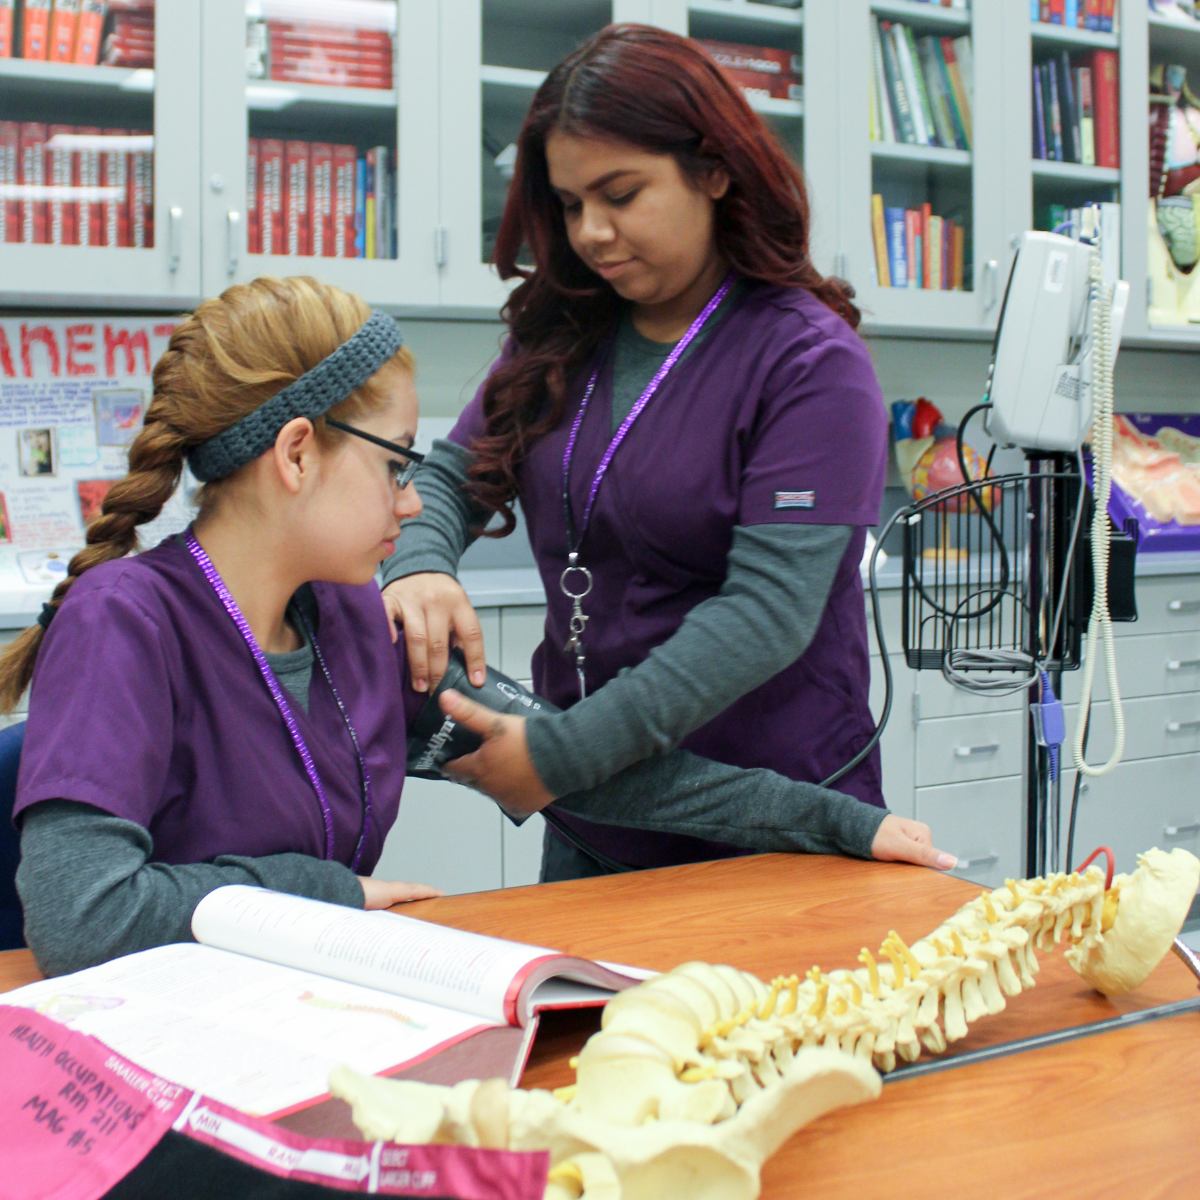 A woman in purple is helping another woman in a lab.